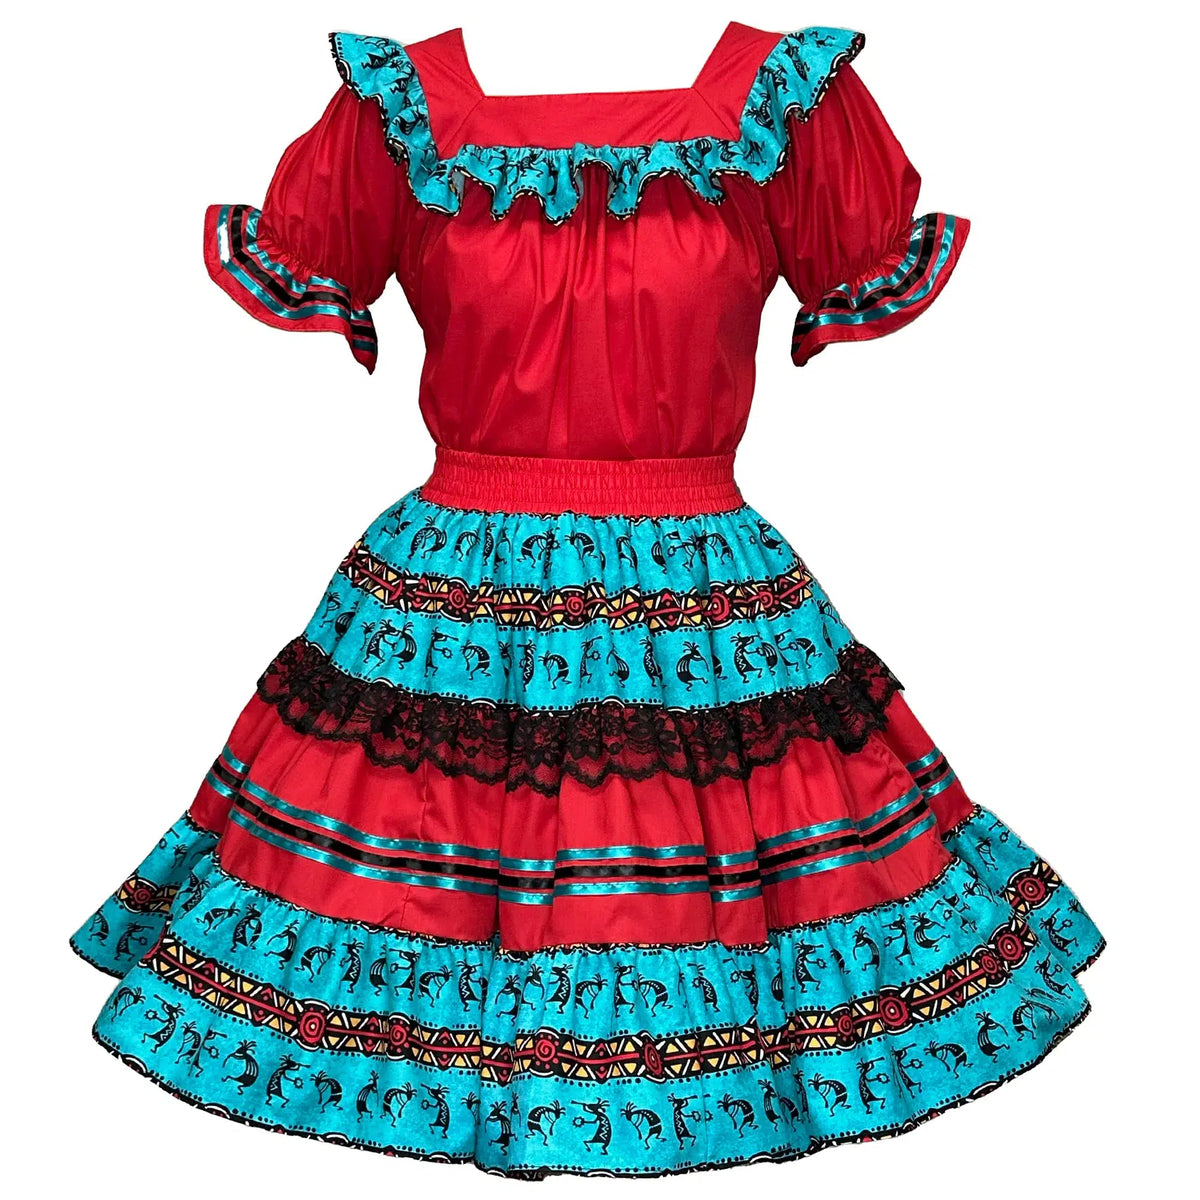 A red and turquoise Kokopelli Square Dance Outfit with a square neck blouse and ruffles by Square Up Fashions.